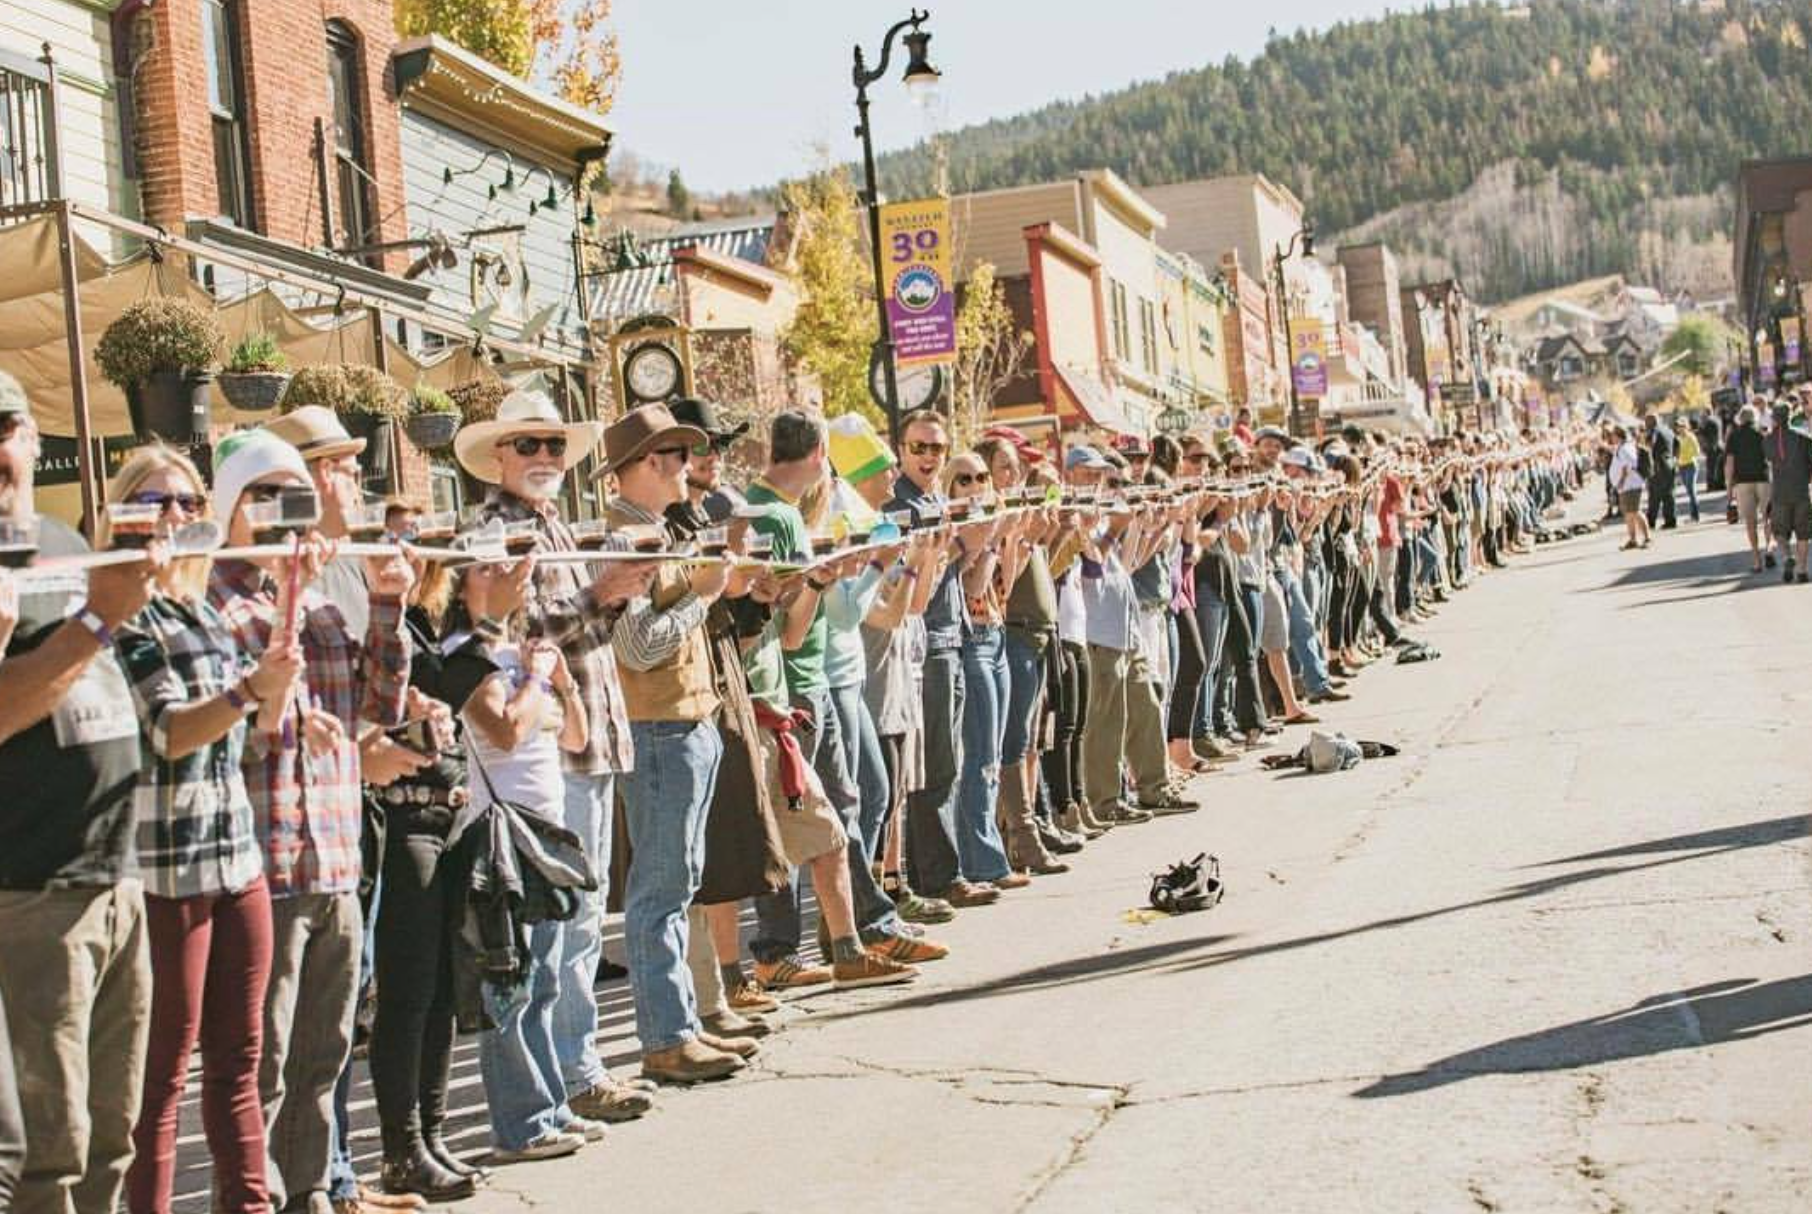 Things to Do in Park City 2nd Annual Shot Ski on Main Street